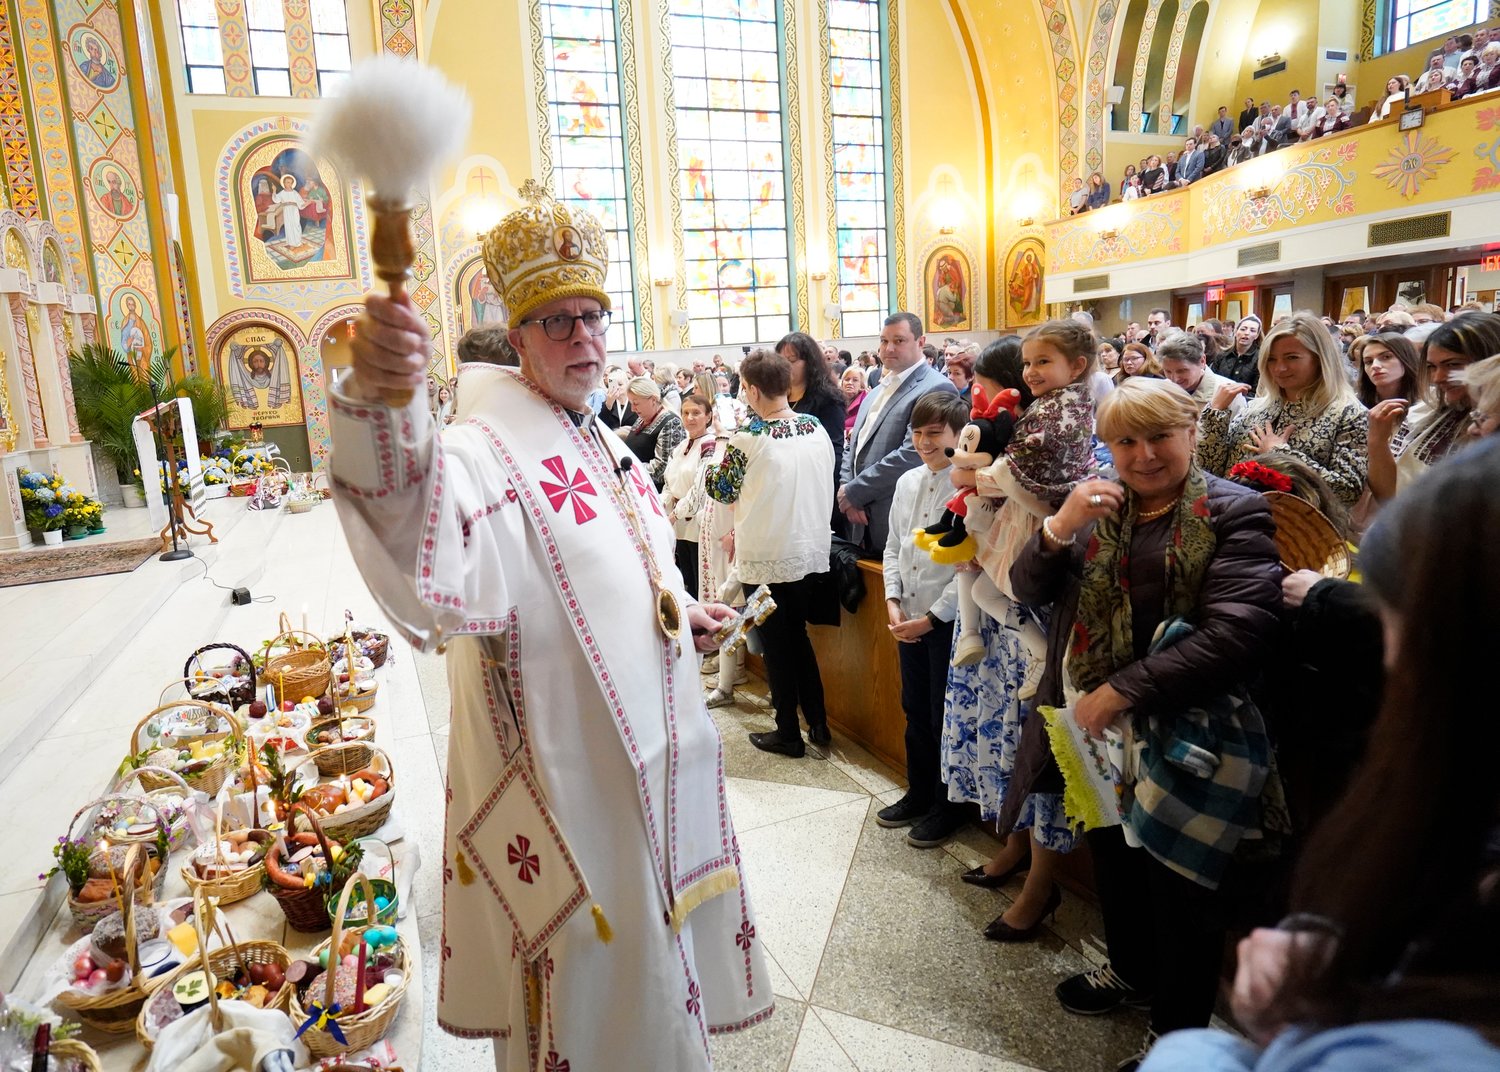 Bishop Paul P. Chomnycky of the Ukrainian Catholic Eparchy of Stamford, Conn., uses holy water to bless the congregation during an Easter Divine Liturgy April 24 at St. George Ukrainian Catholic Church in Manhattan’s East Village. The parish maintains many of its ancestral faith traditions, including celebrating services according to the Julian calendar.